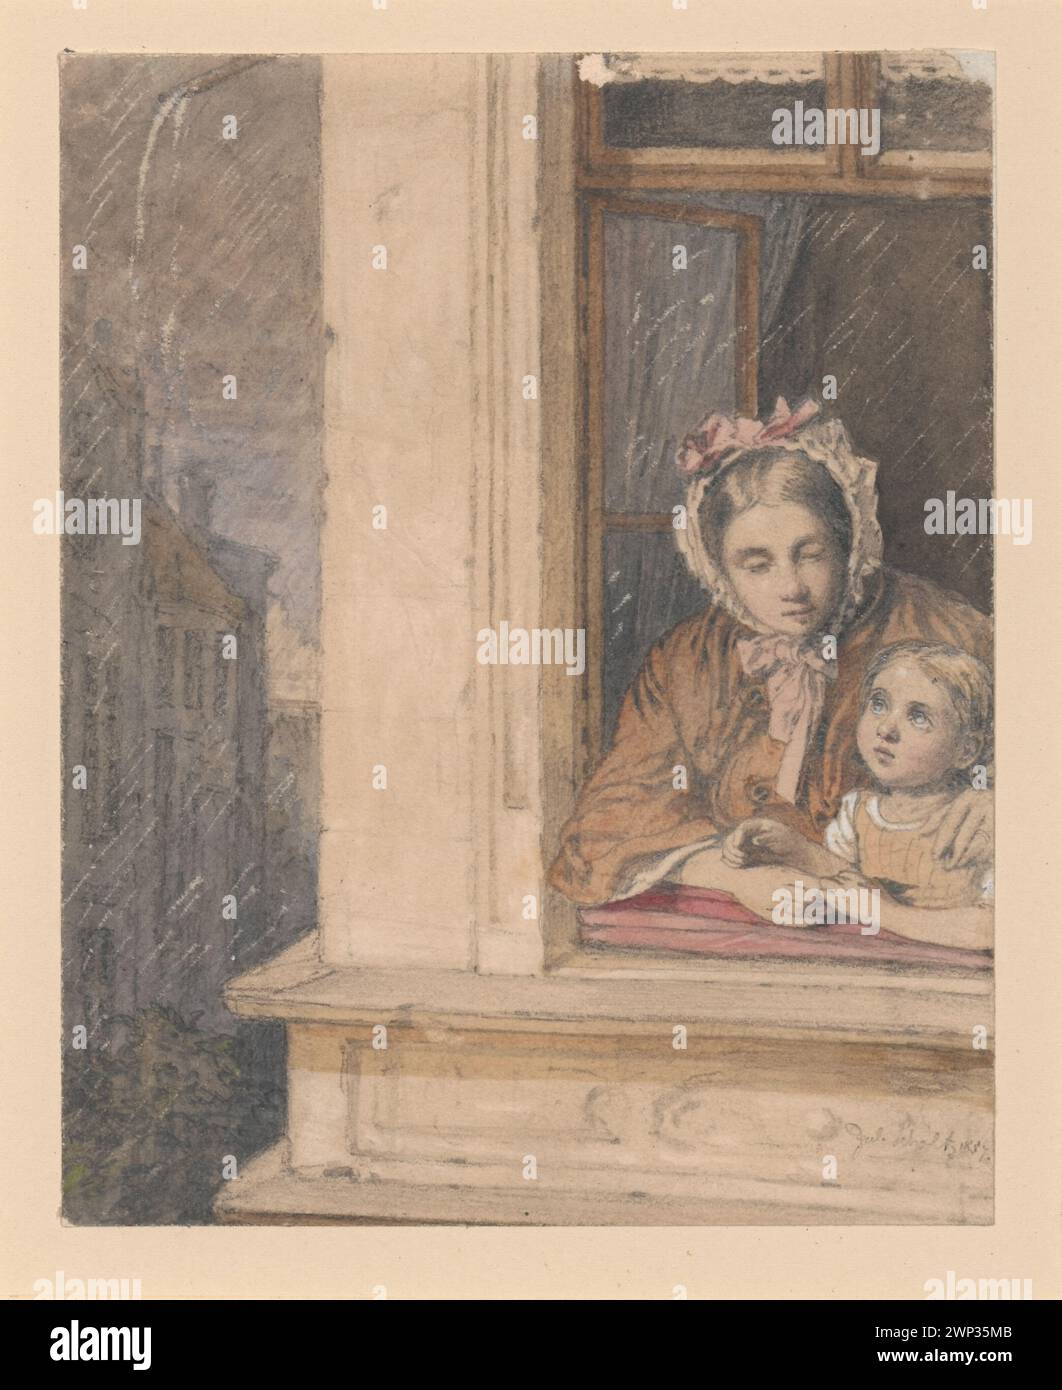 It rains '; Scholtz, Julius (1825-1893); 1857 (1844-00-00-1844-00-00); the Muse of the National Museum in Warsaw was downloaded from the system; painting / paint / watercolor, drawing / o with wtkiens / paper; height 14.9 cm, width 11.8 cm; fig. nm.xix 896 MNW; all rights reservation.Schlesisches Museum der Bildenen Künste (Wrocław - 1880-1945) - collection, Scholtz, Hanna (Flow. Ca 1912) - Dar, Biedermeier (style), rain, children, women with children, German drawings Stock Photo